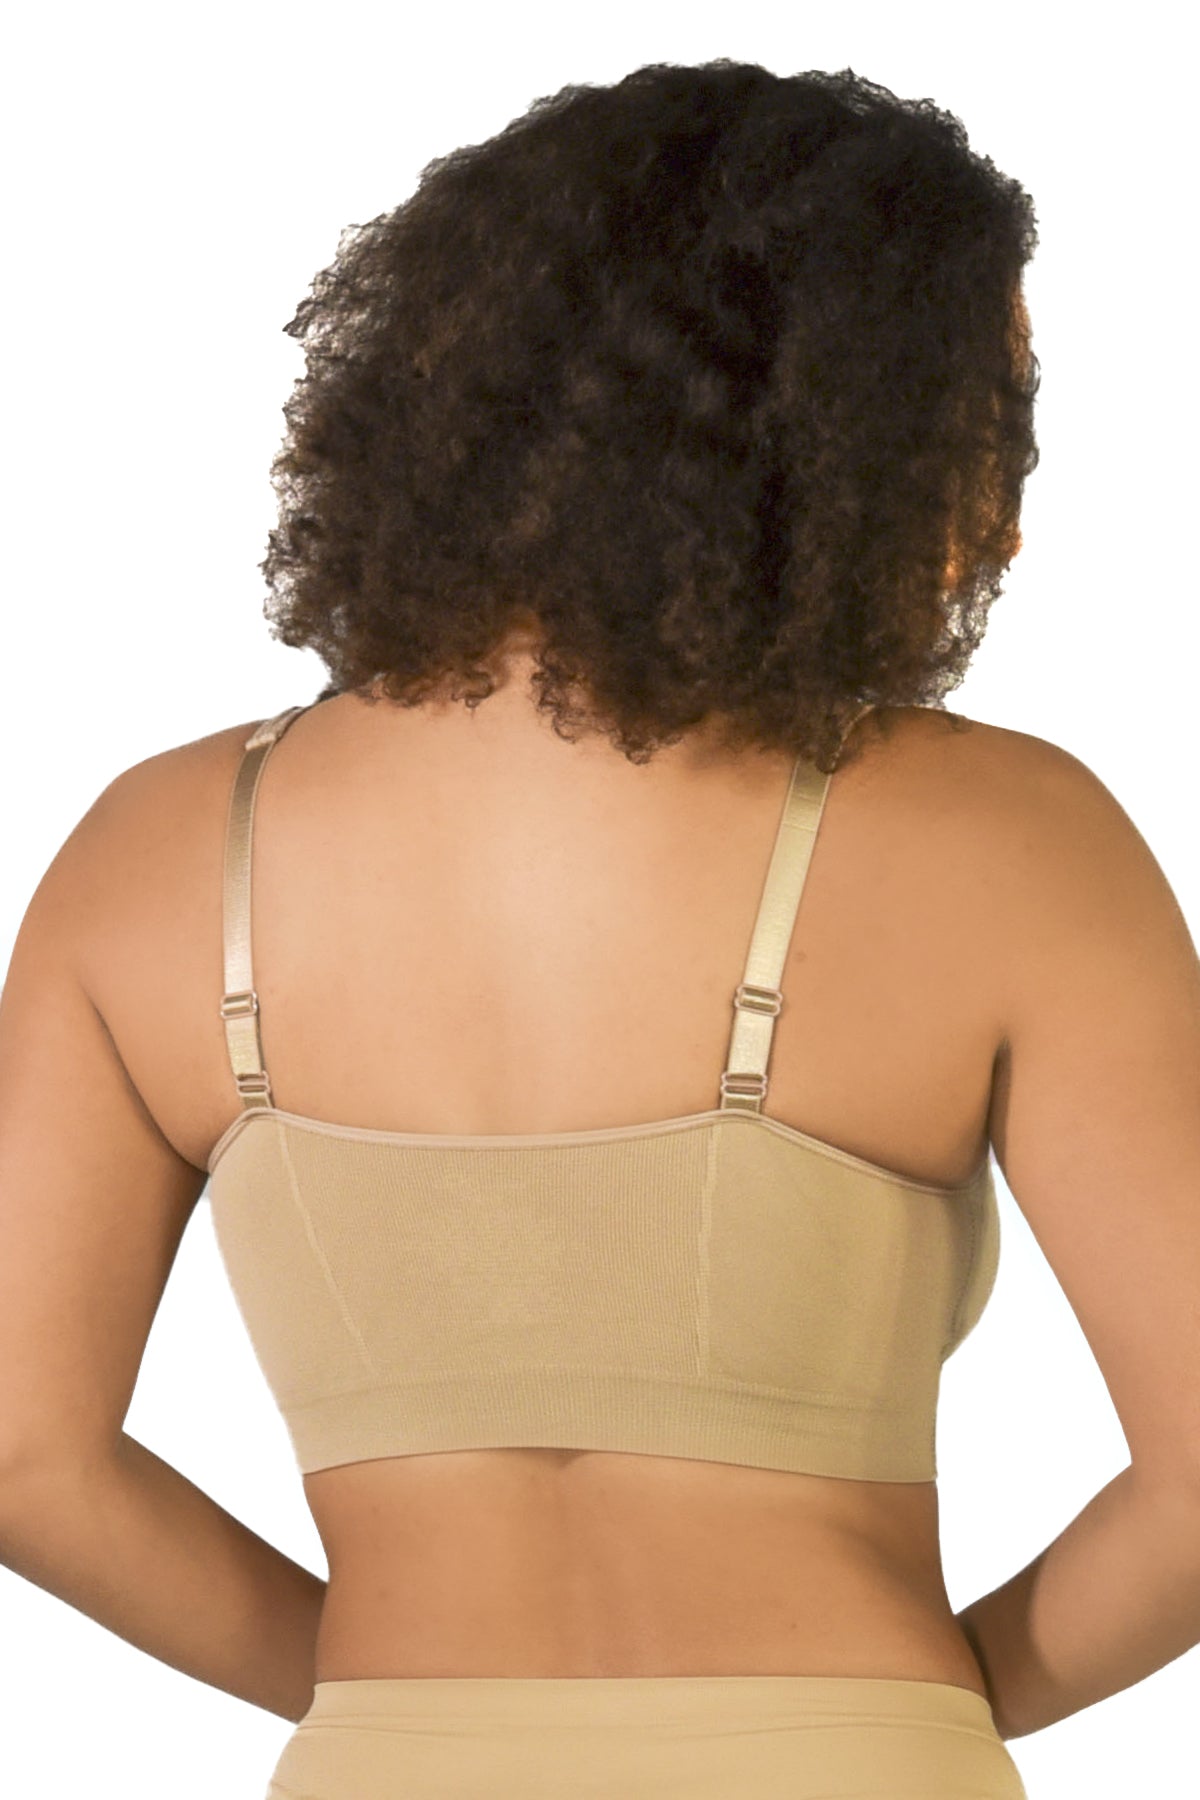 SHAPERX Women‘s High Stretch Wireless Bra with Scoop Longline Design and  Removable Pads